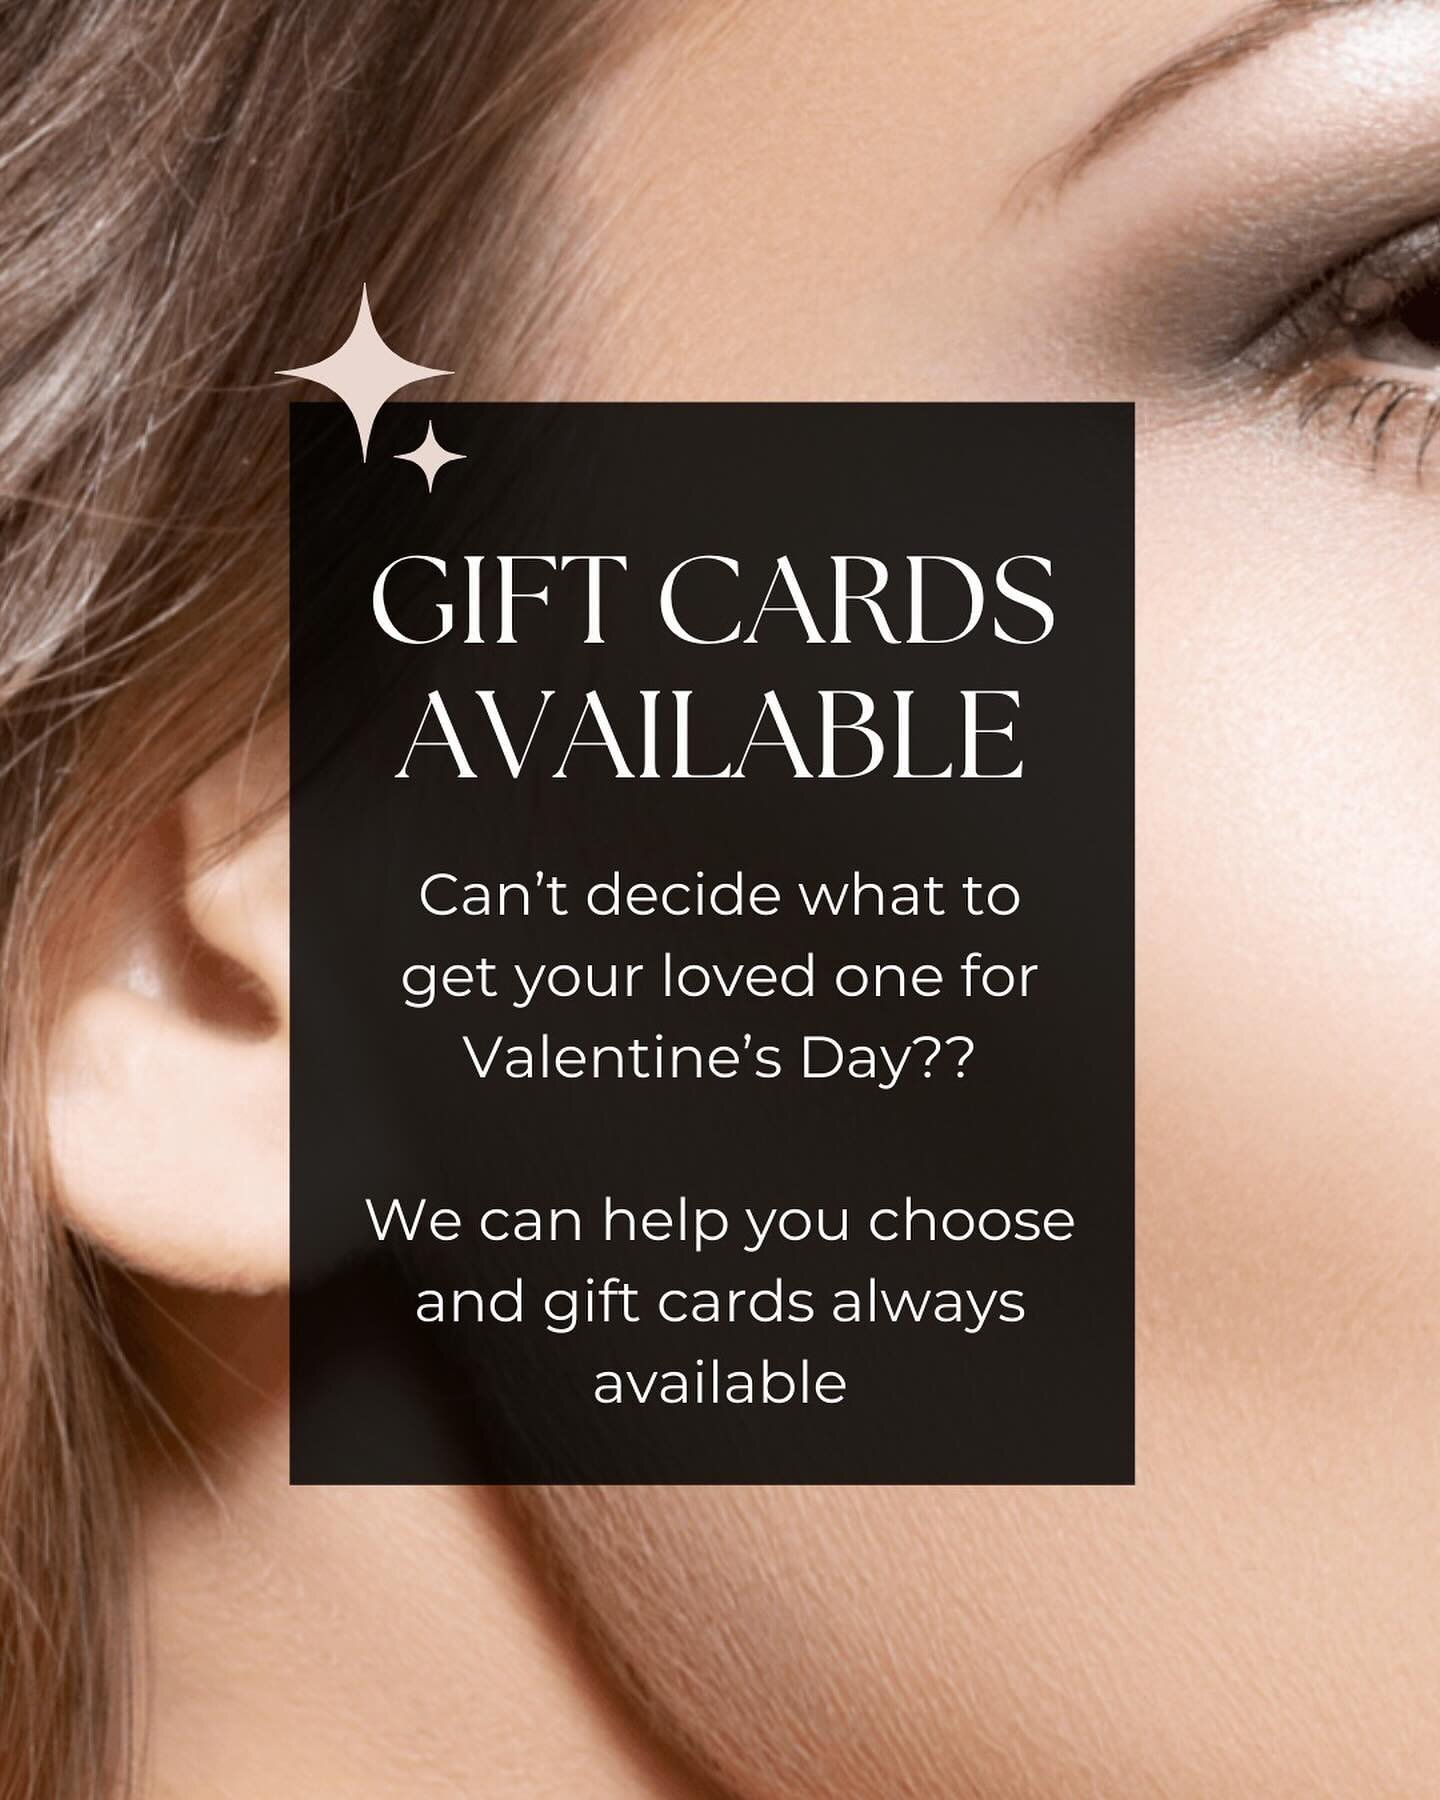 ❤️❤️❤️Looking for a last minute Valentine&rsquo;s gift?? Botox, fillers, lasers, and facials oh my! Can&rsquo;t decide? Gift cards are always nice❤️❤️❤️

#botoxsarasota #botoxlakewoodranch
#lipfillerlakewoodranch #sarasotabotox
#lakewoodranchmedspa #